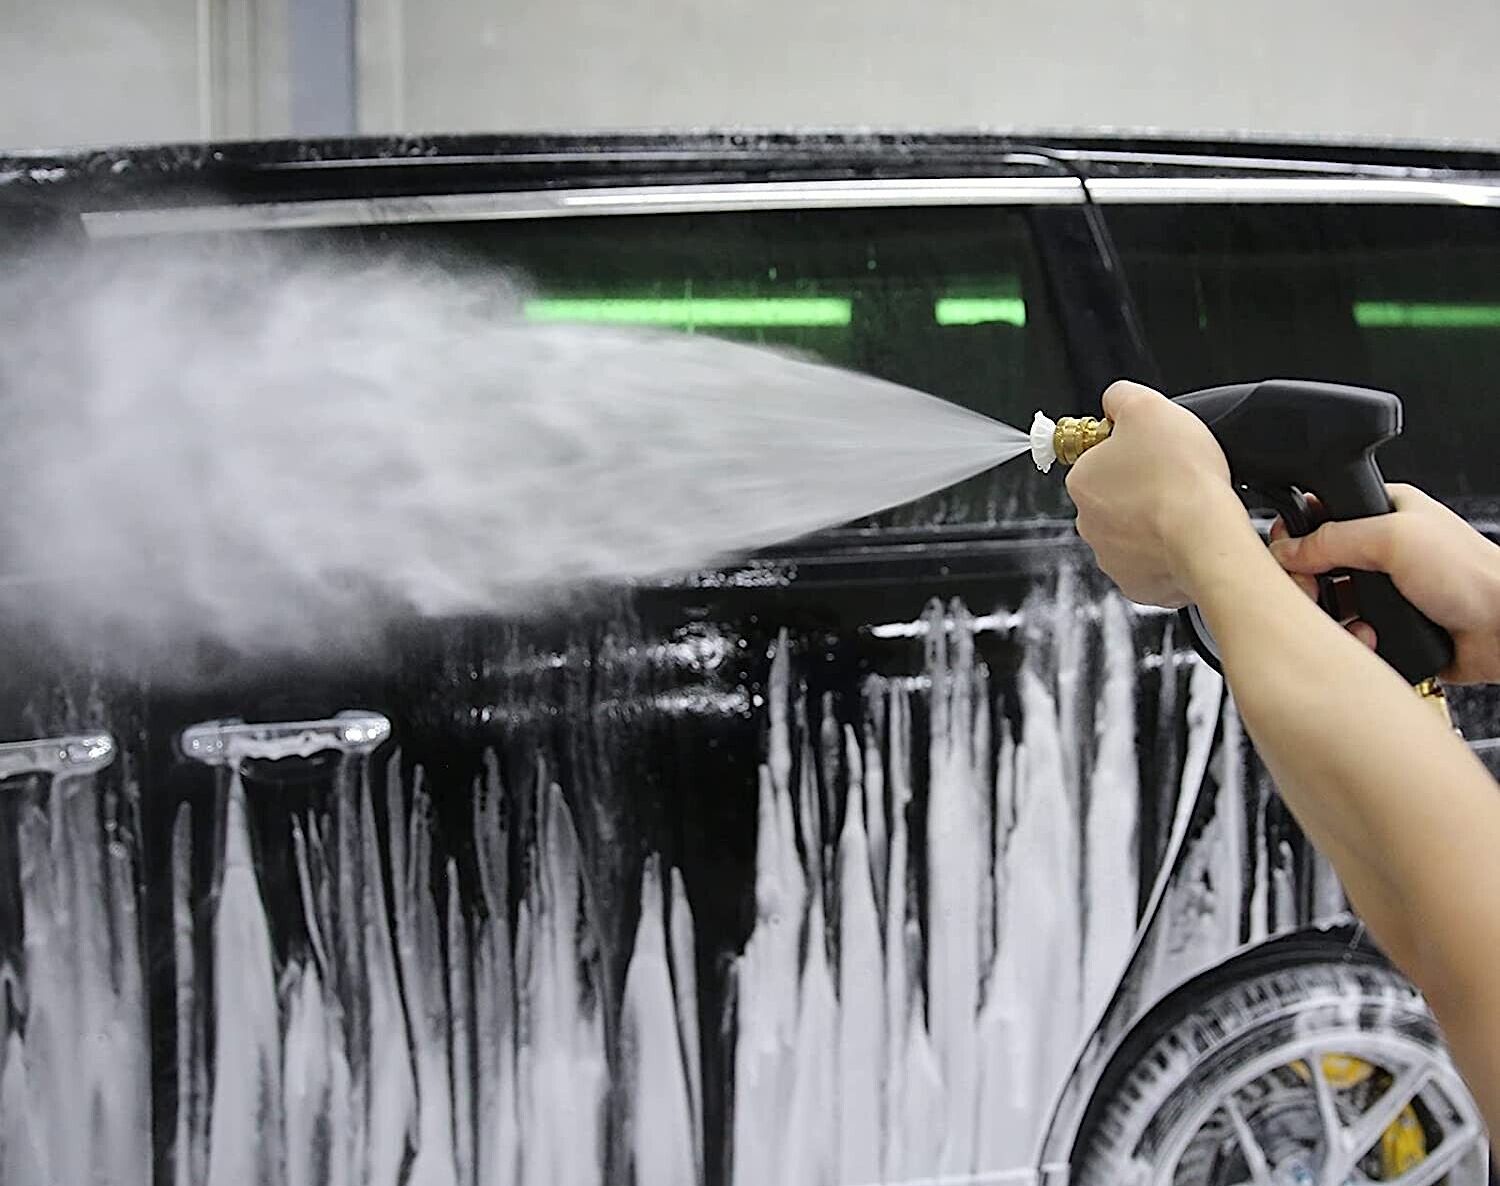 How to Remove Overspray from Car: Expert Tips and Tricks